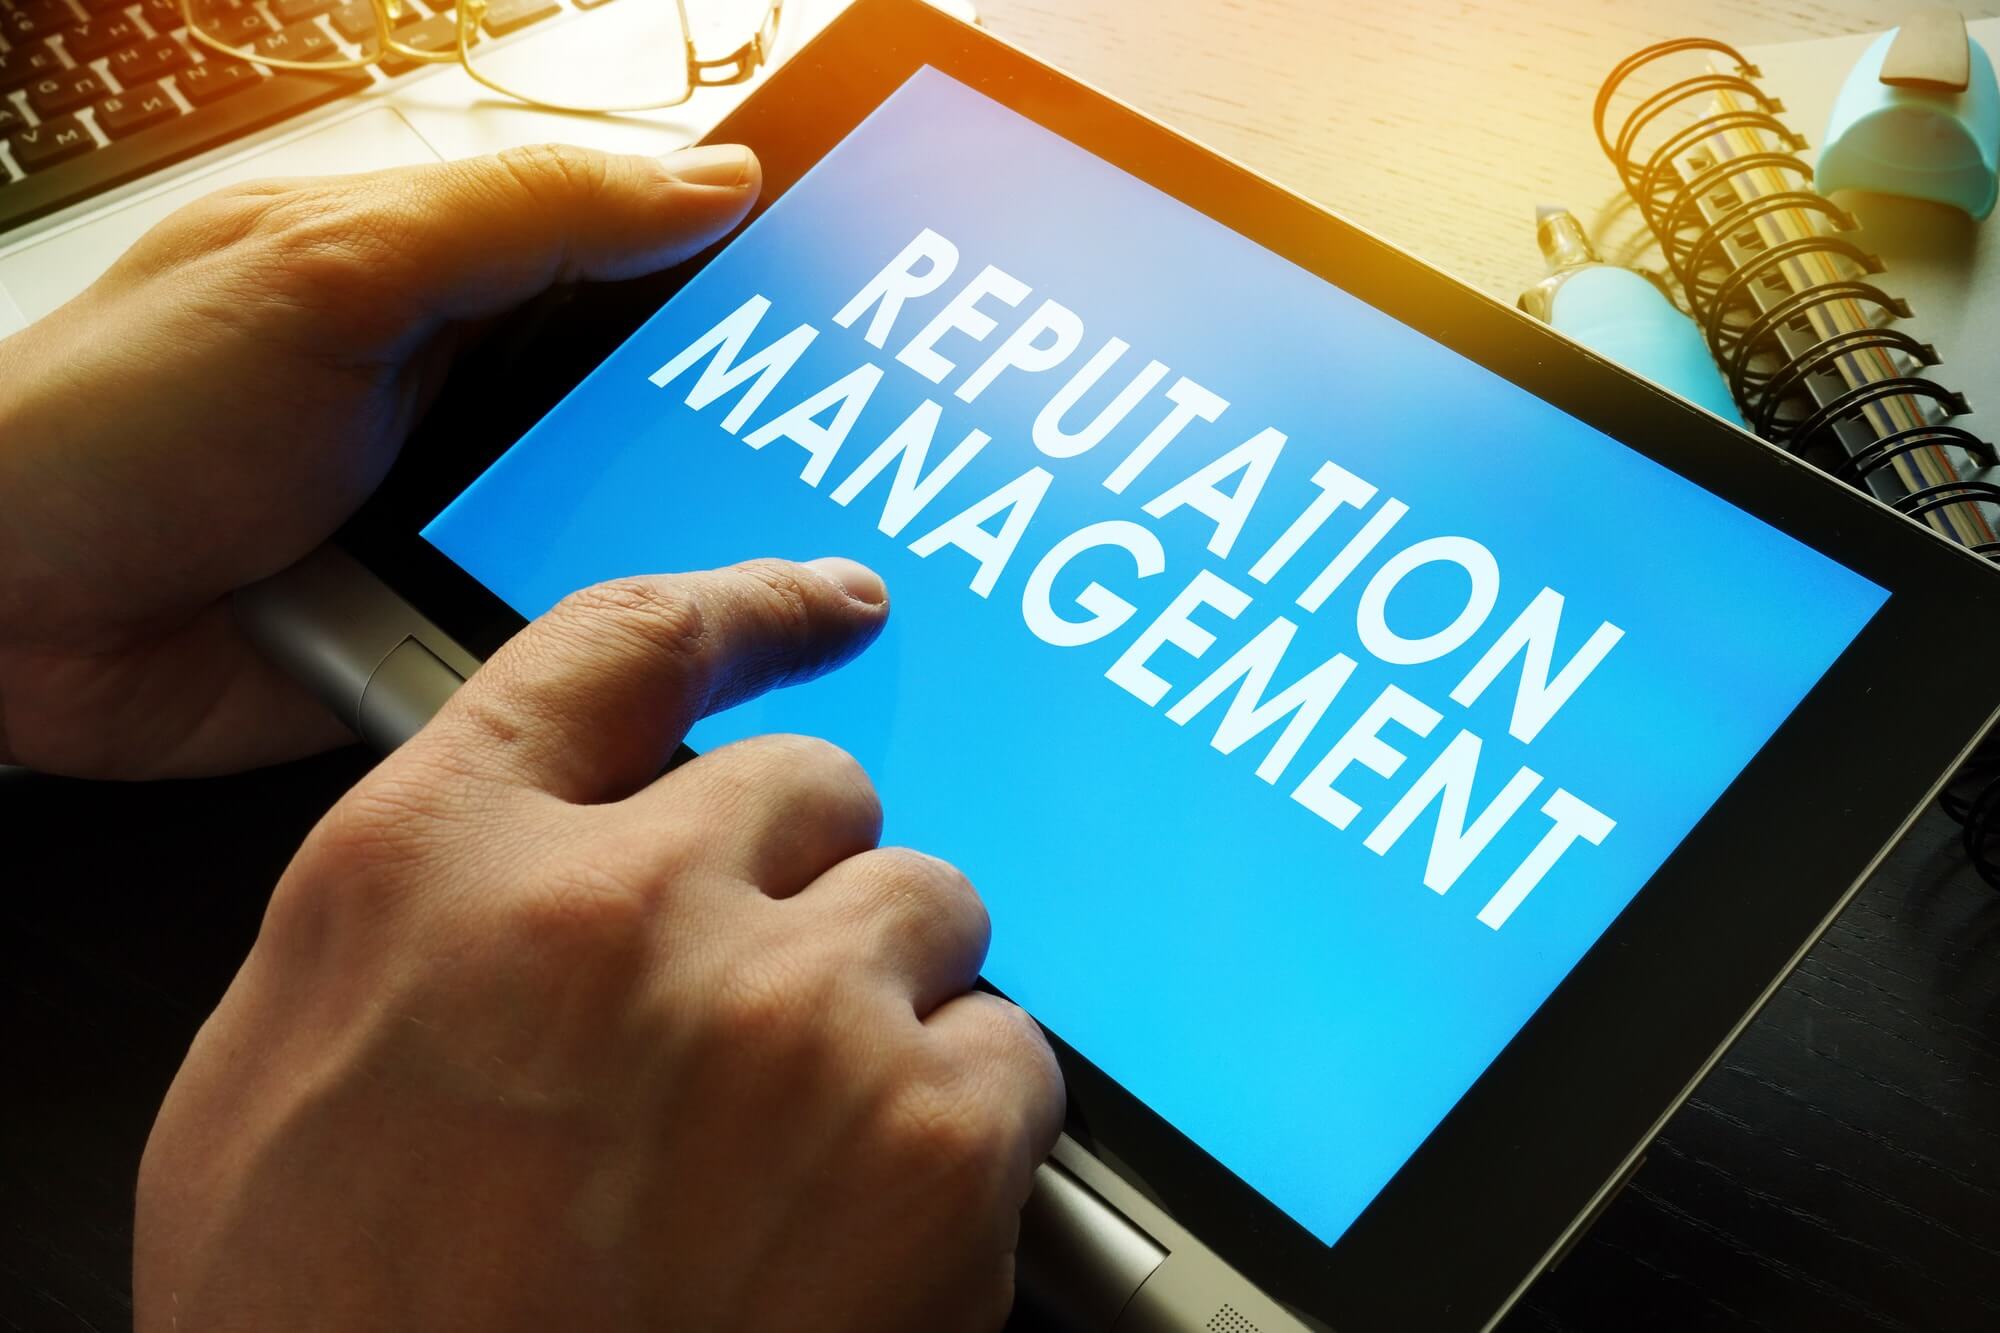 Have a bad rep? Reputation management services can help get things right.